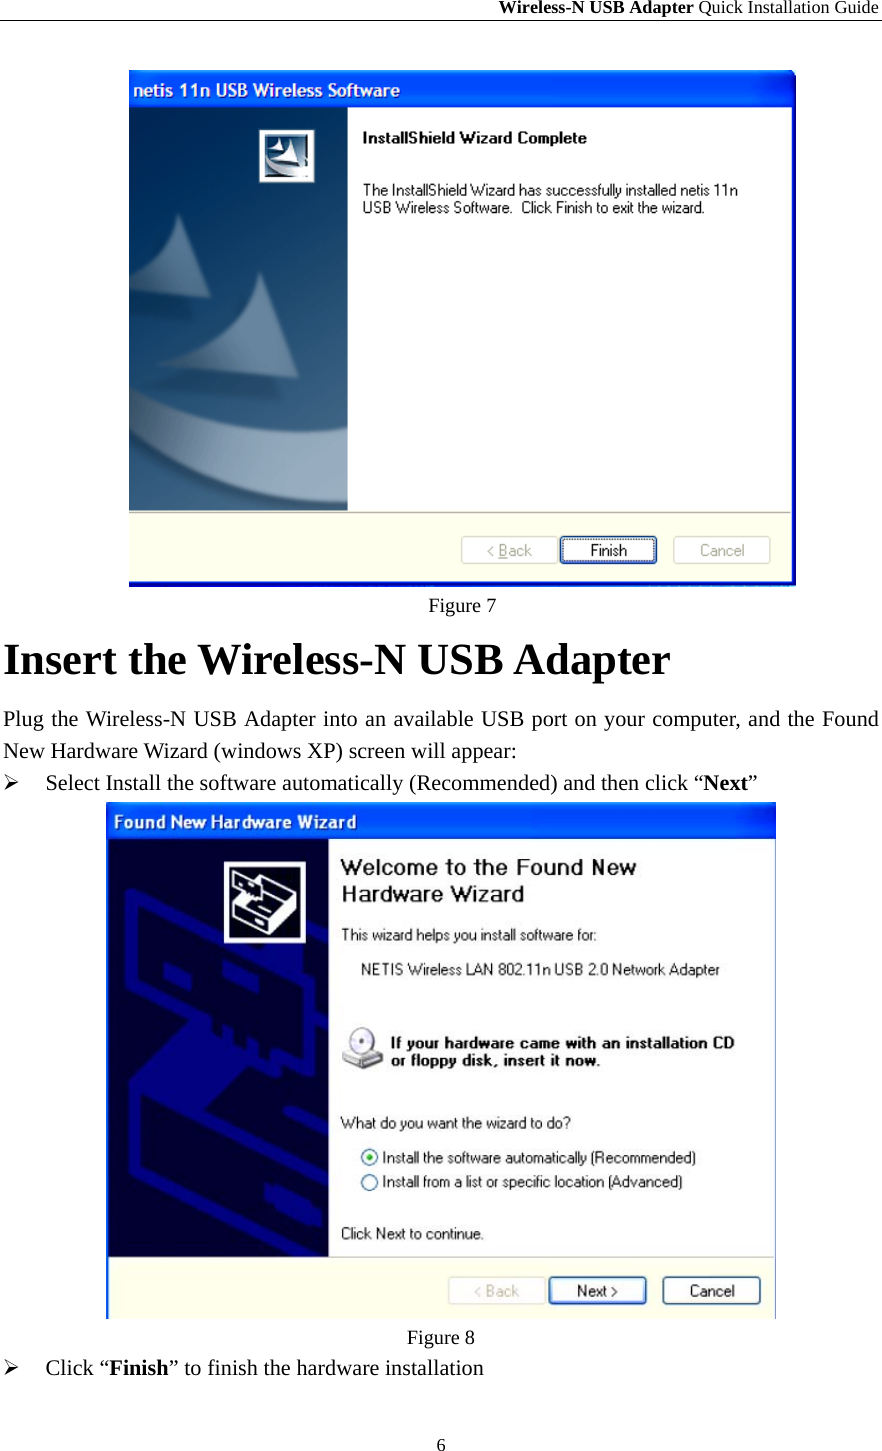 Wireless-N USB Adapter Quick Installation Guide 6  Figure 7 Insert the Wireless-N USB Adapter Plug the Wireless-N USB Adapter into an available USB port on your computer, and the Found New Hardware Wizard (windows XP) screen will appear:  Select Install the software automatically (Recommended) and then click “Next”  Figure 8  Click “Finish” to finish the hardware installation 